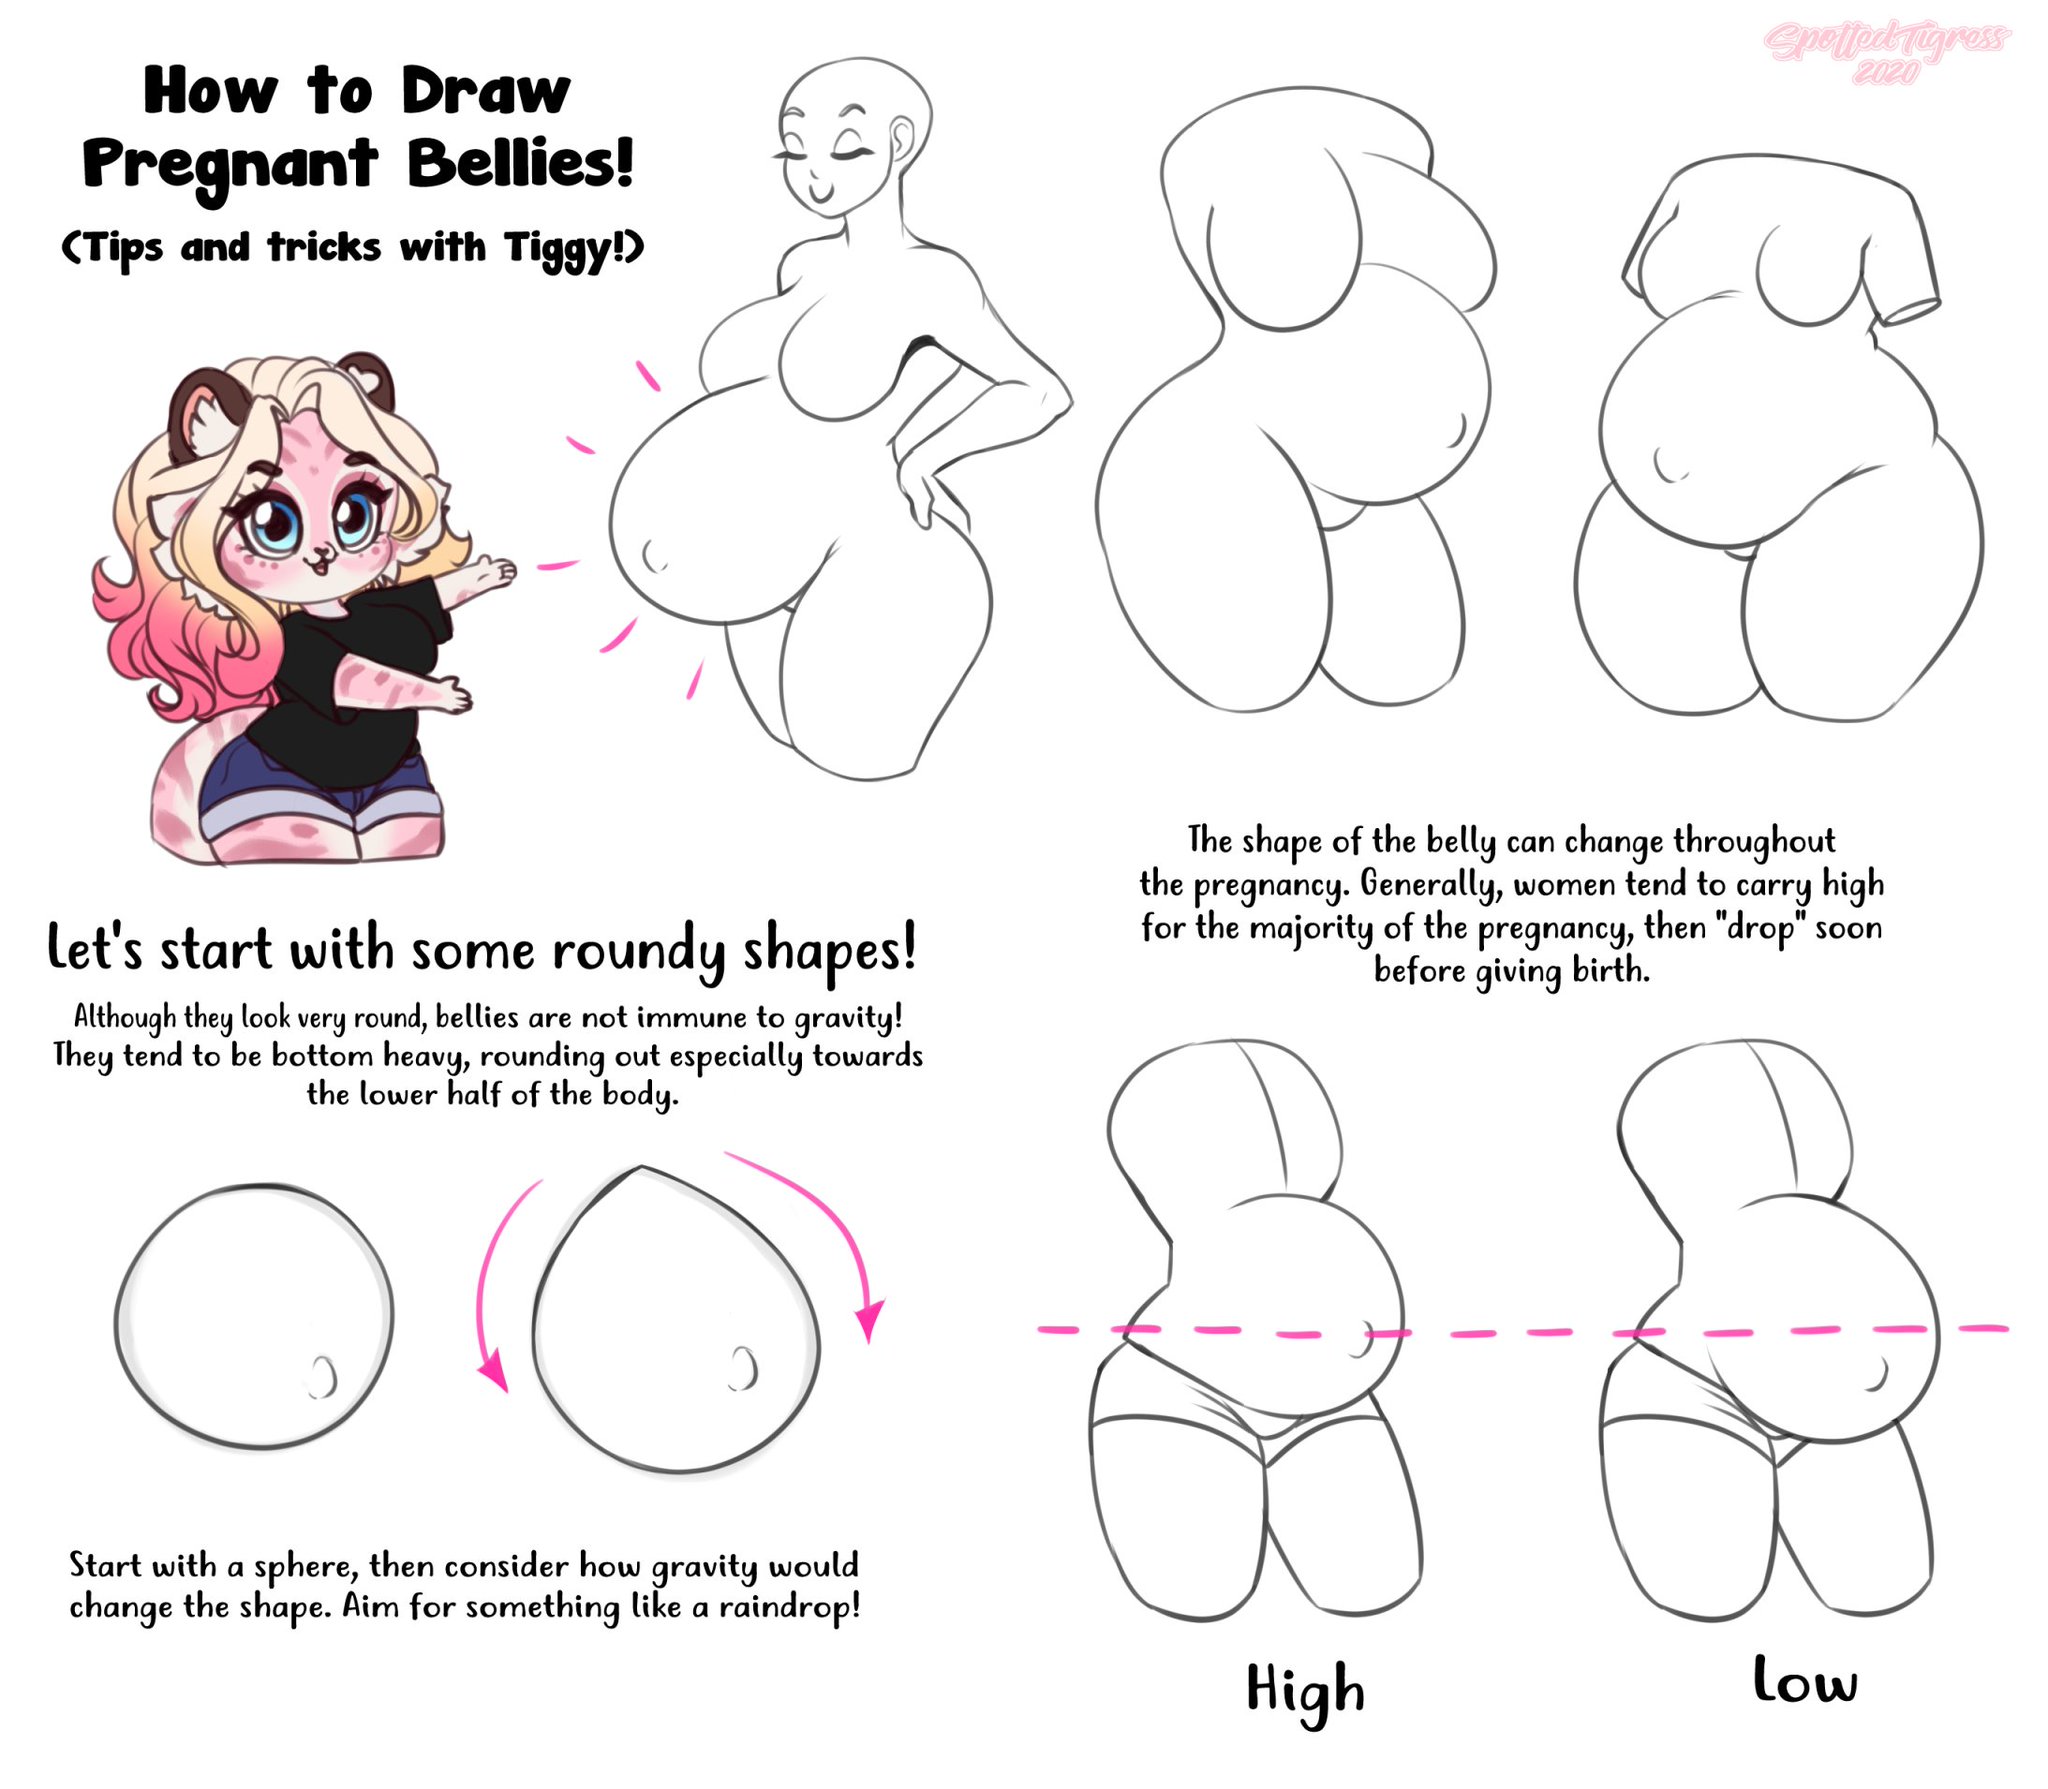 I put together a loose guide for drawing pregnant bellies! 